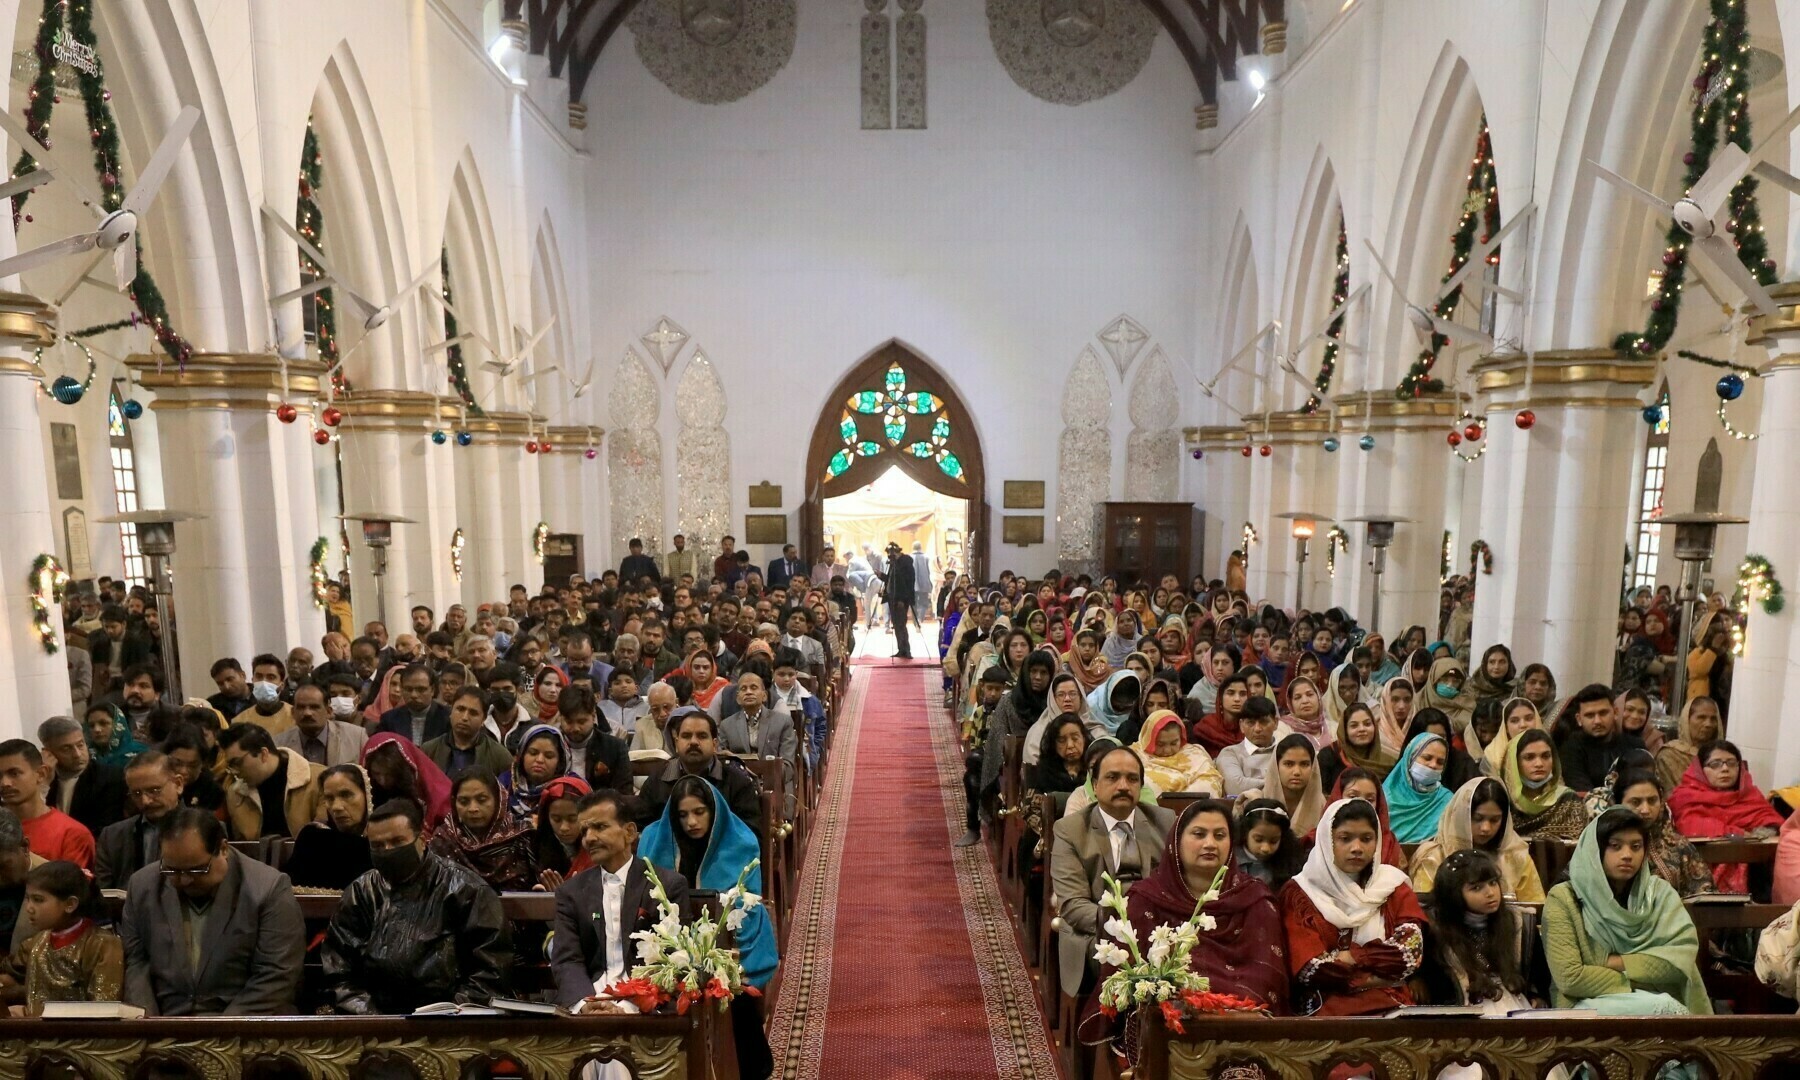 People attend a Christmas Day service at the St. John’s Cathedral in Peshawar, on December 25, 2022. — Reuters